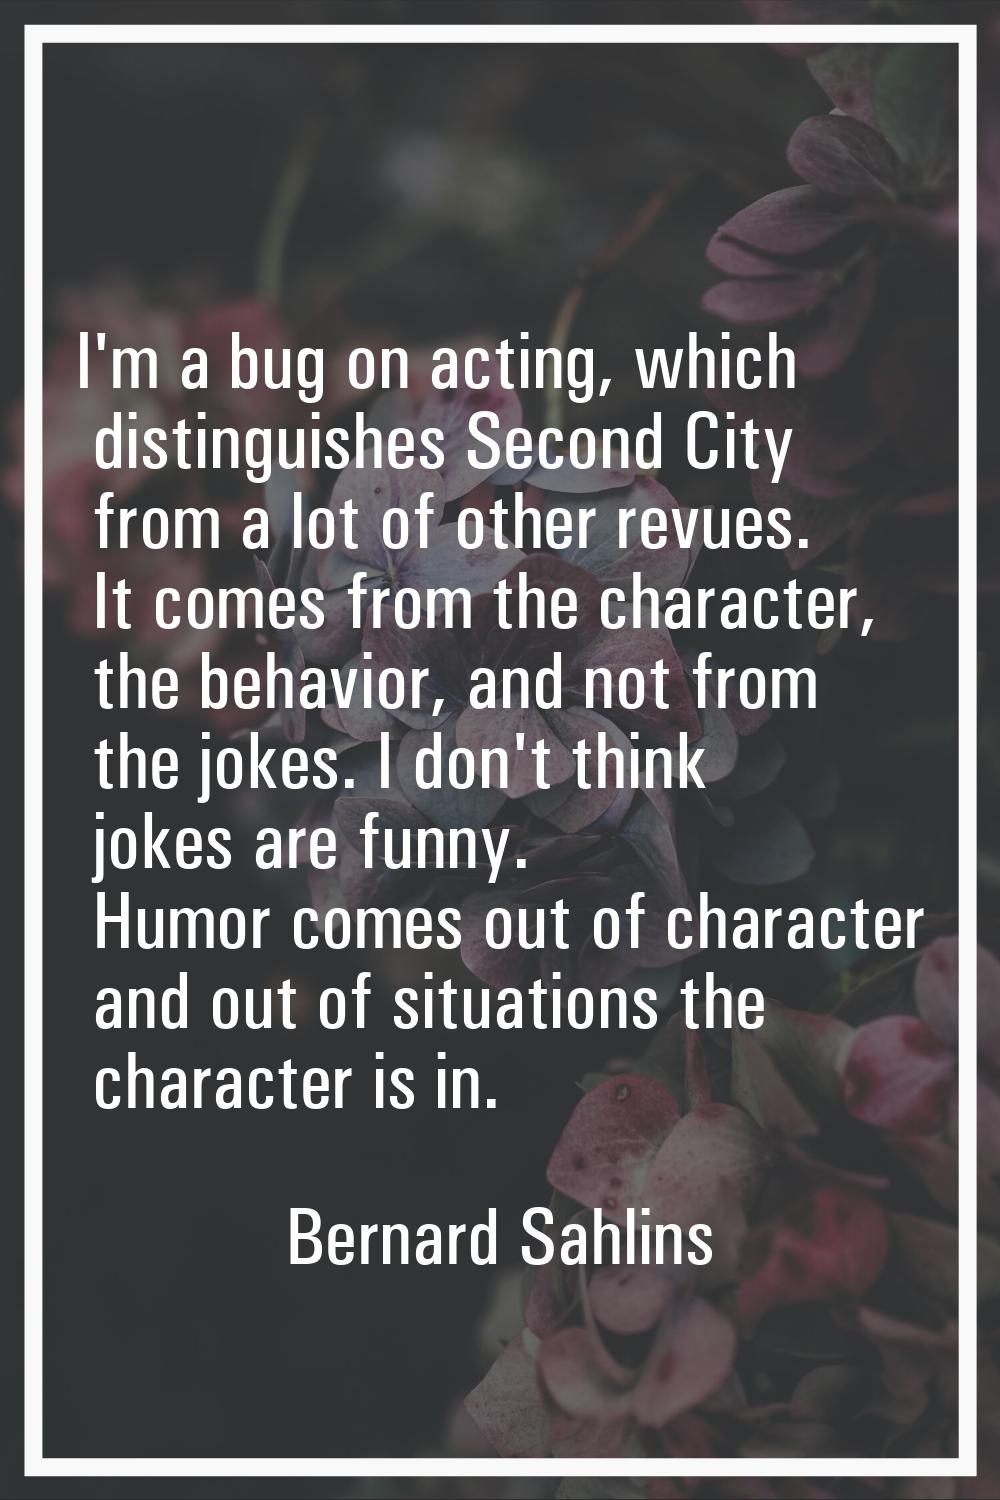 I'm a bug on acting, which distinguishes Second City from a lot of other revues. It comes from the 